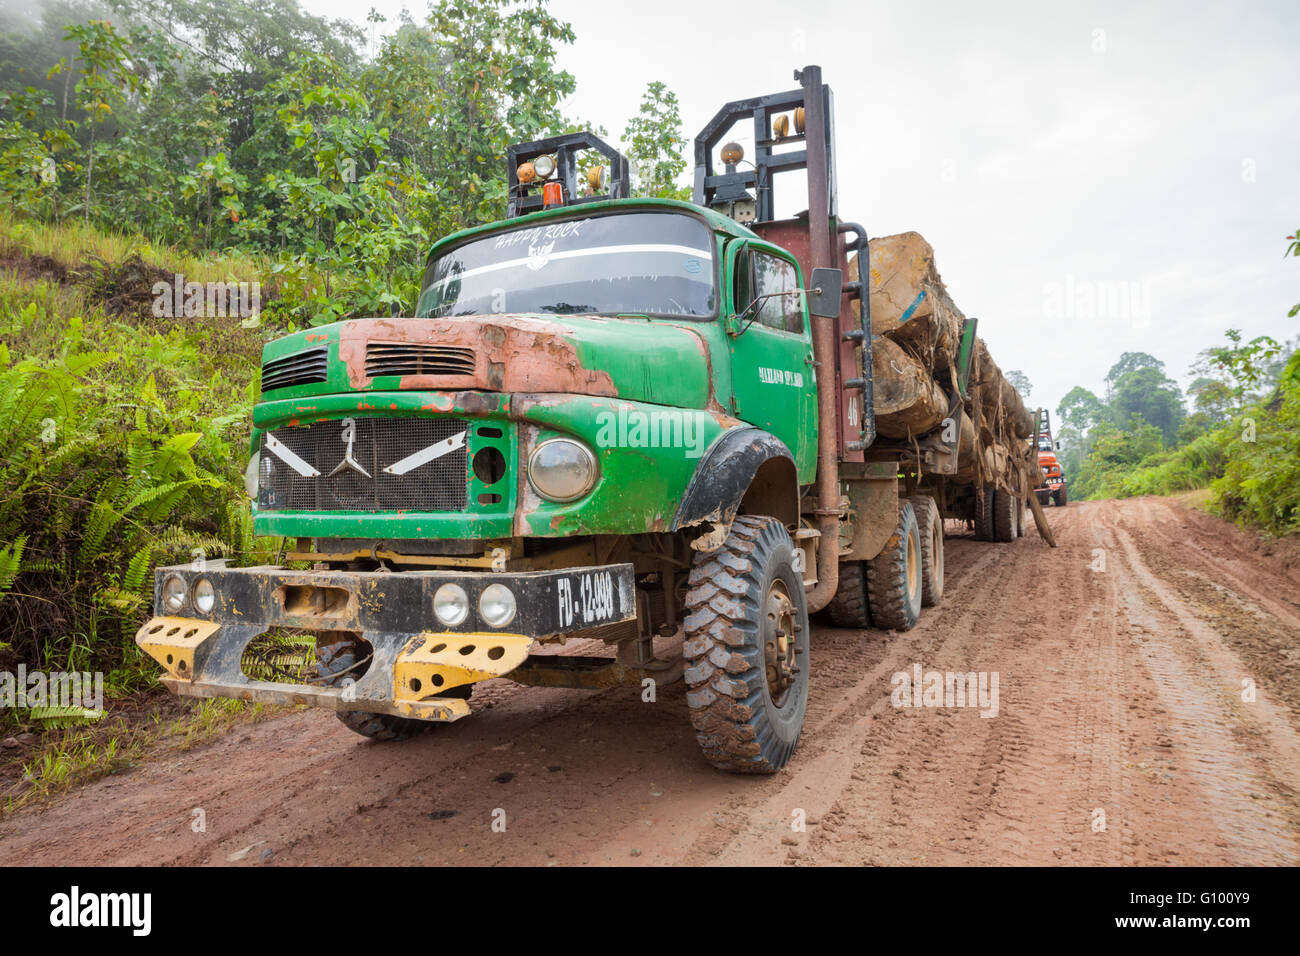 Lorries carrying harvested logs or trees in northern remote Sabah, Malaysian Borneo Stock Photo